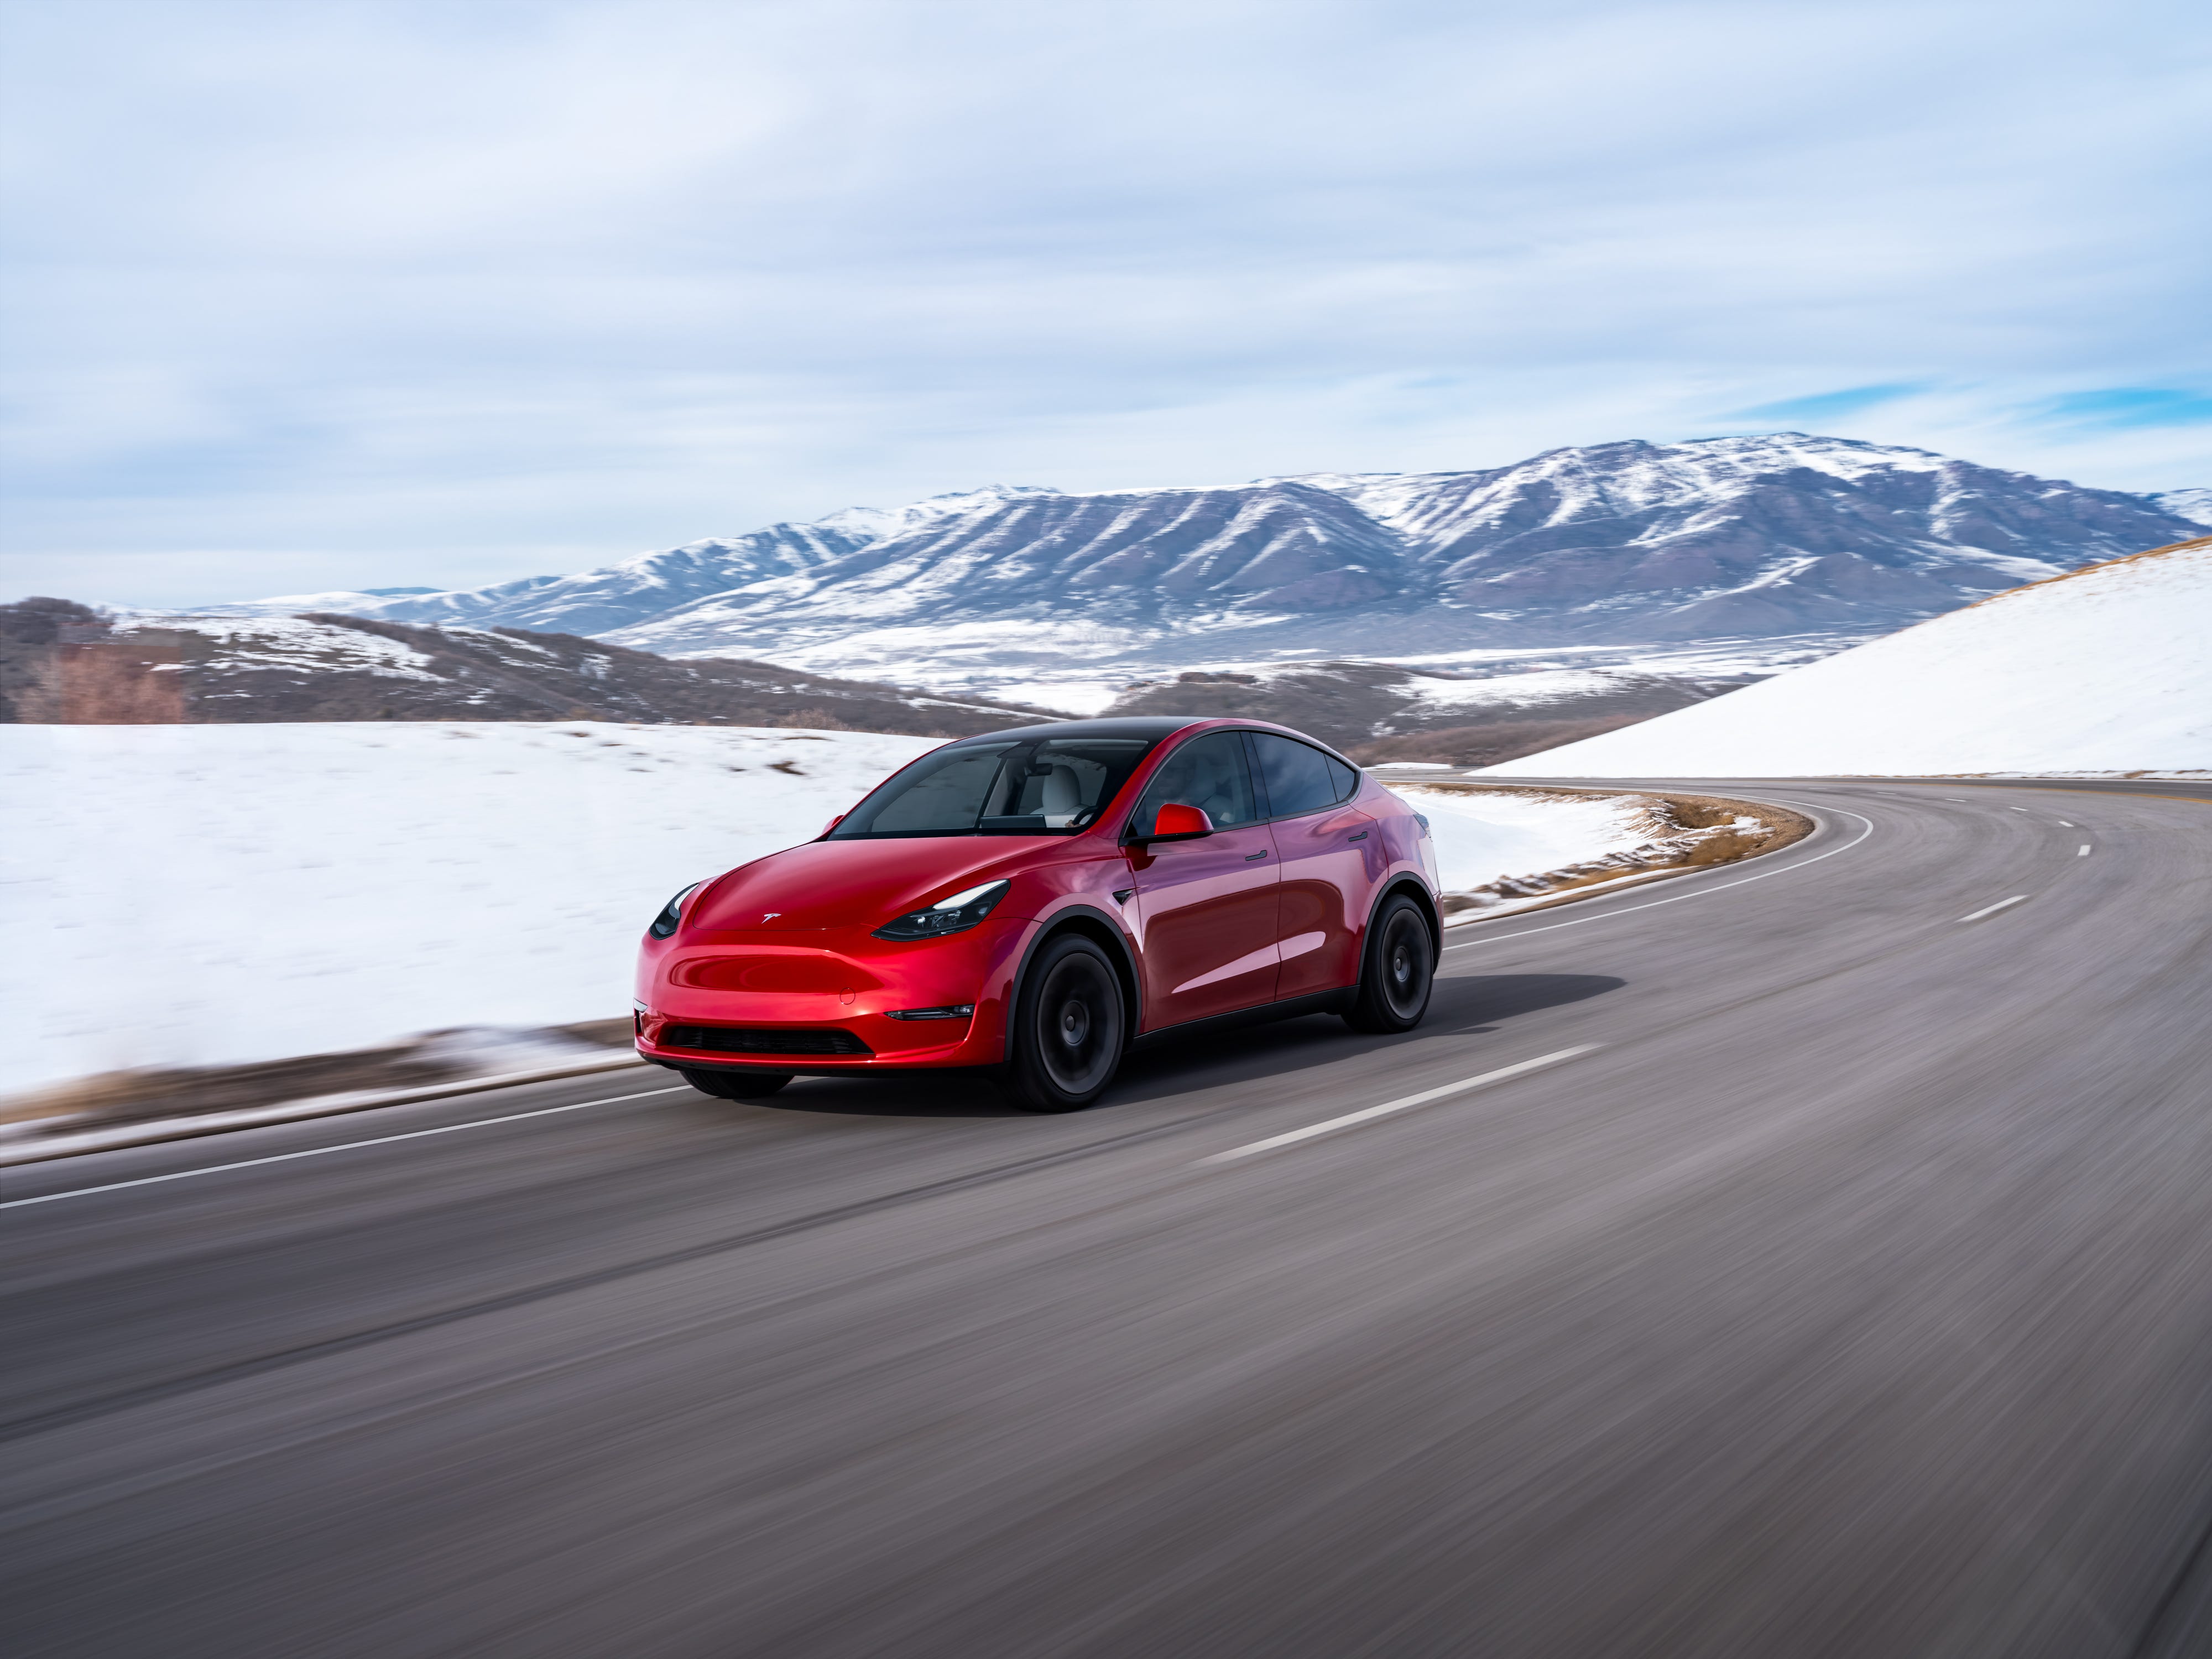 A red Tesla Model Y SUV drives down a road with snow and mountains in the background.